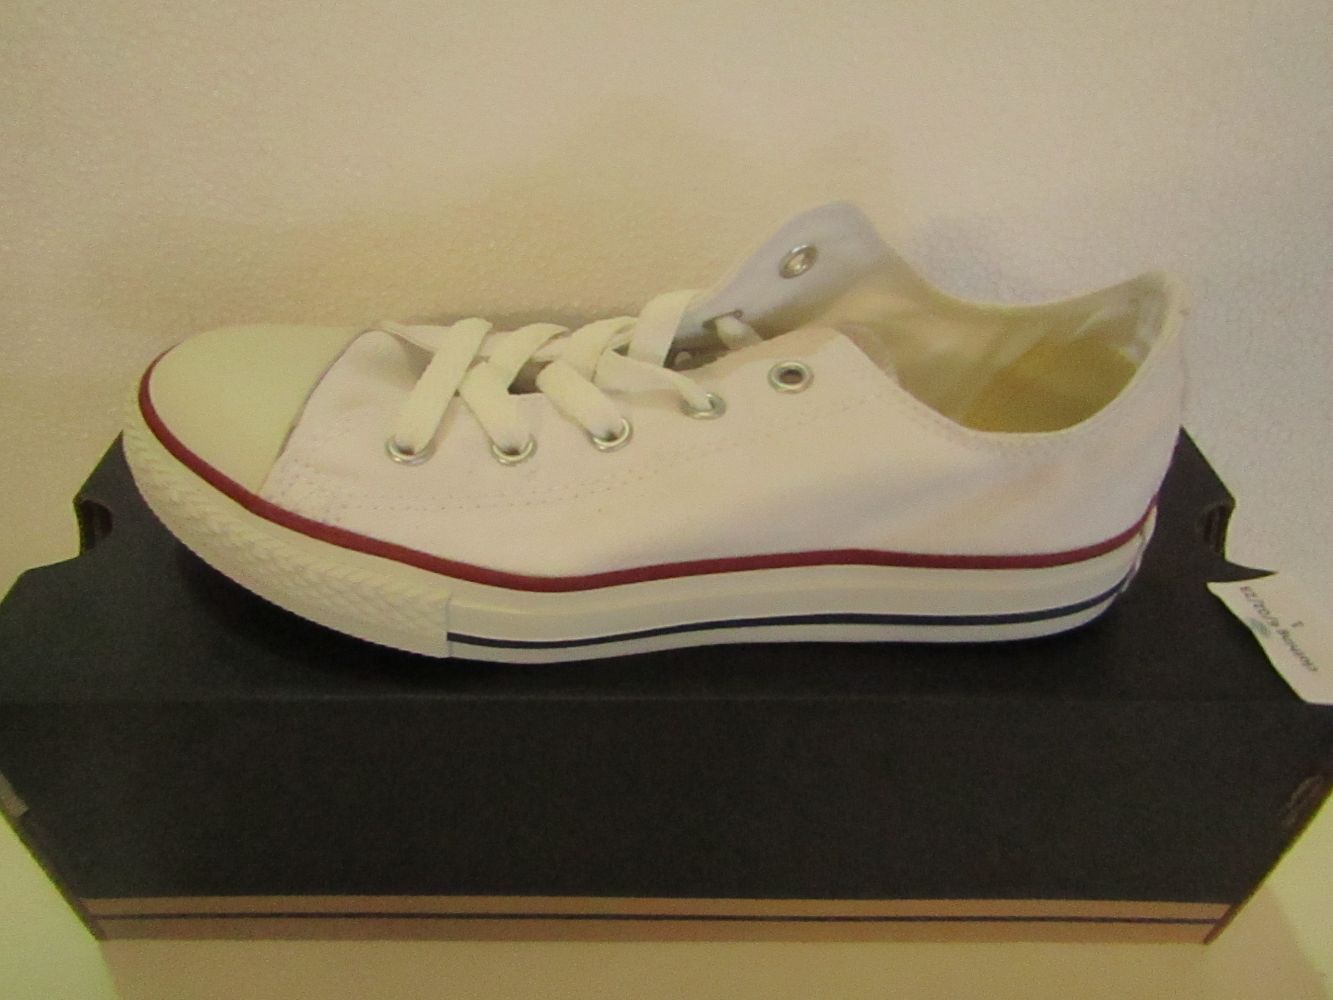 Converse all stars trainers at just £15 start bid, various sizes, styles and materials